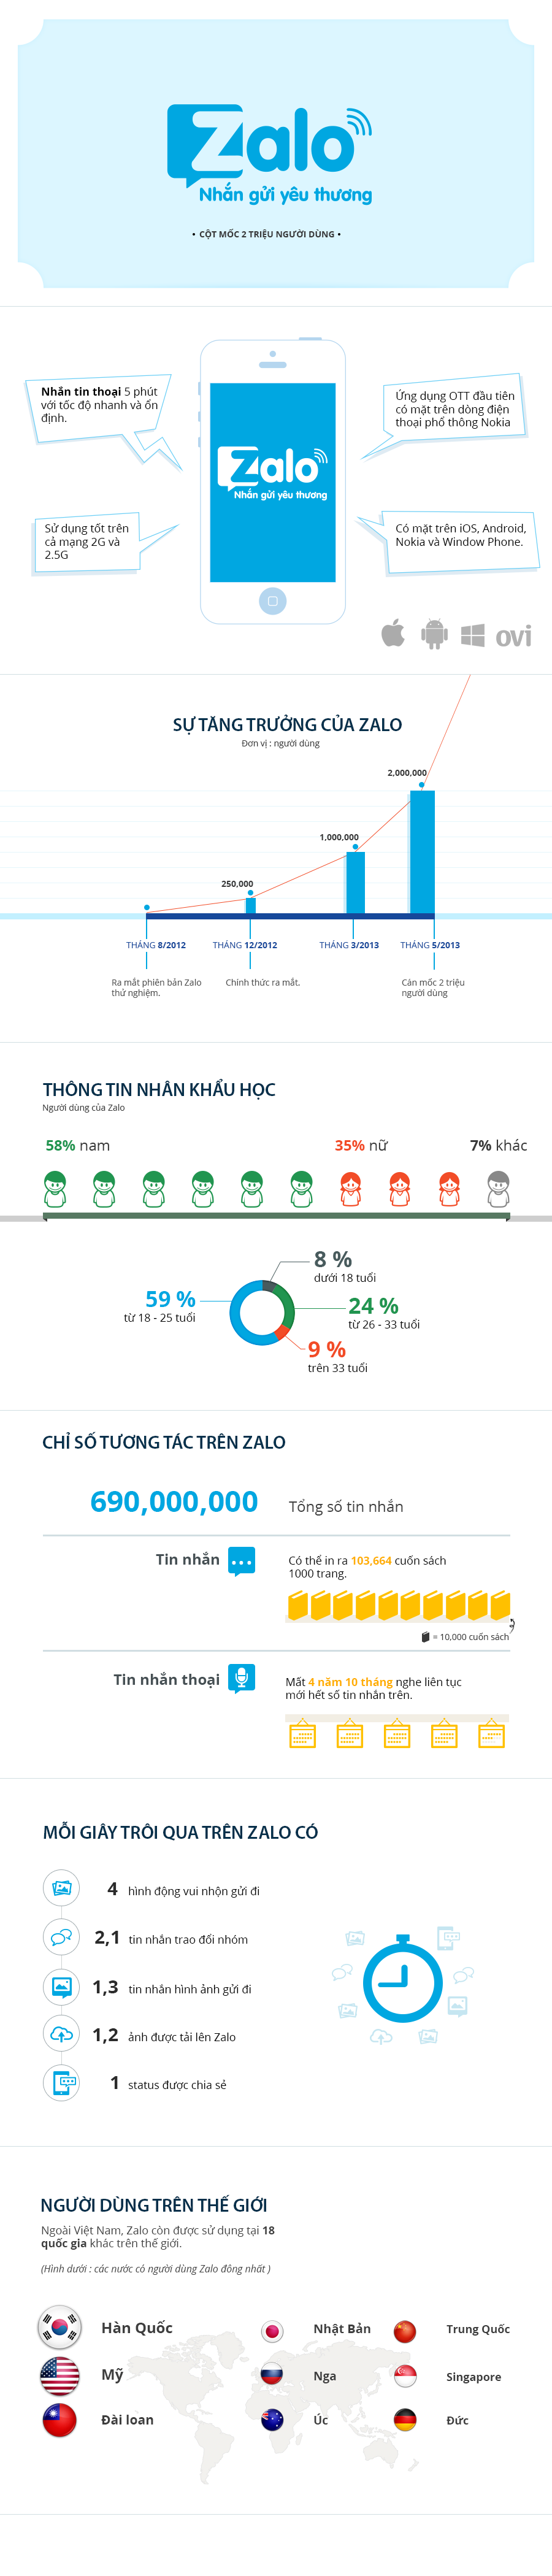 Zalo-Infographic-Vie.png